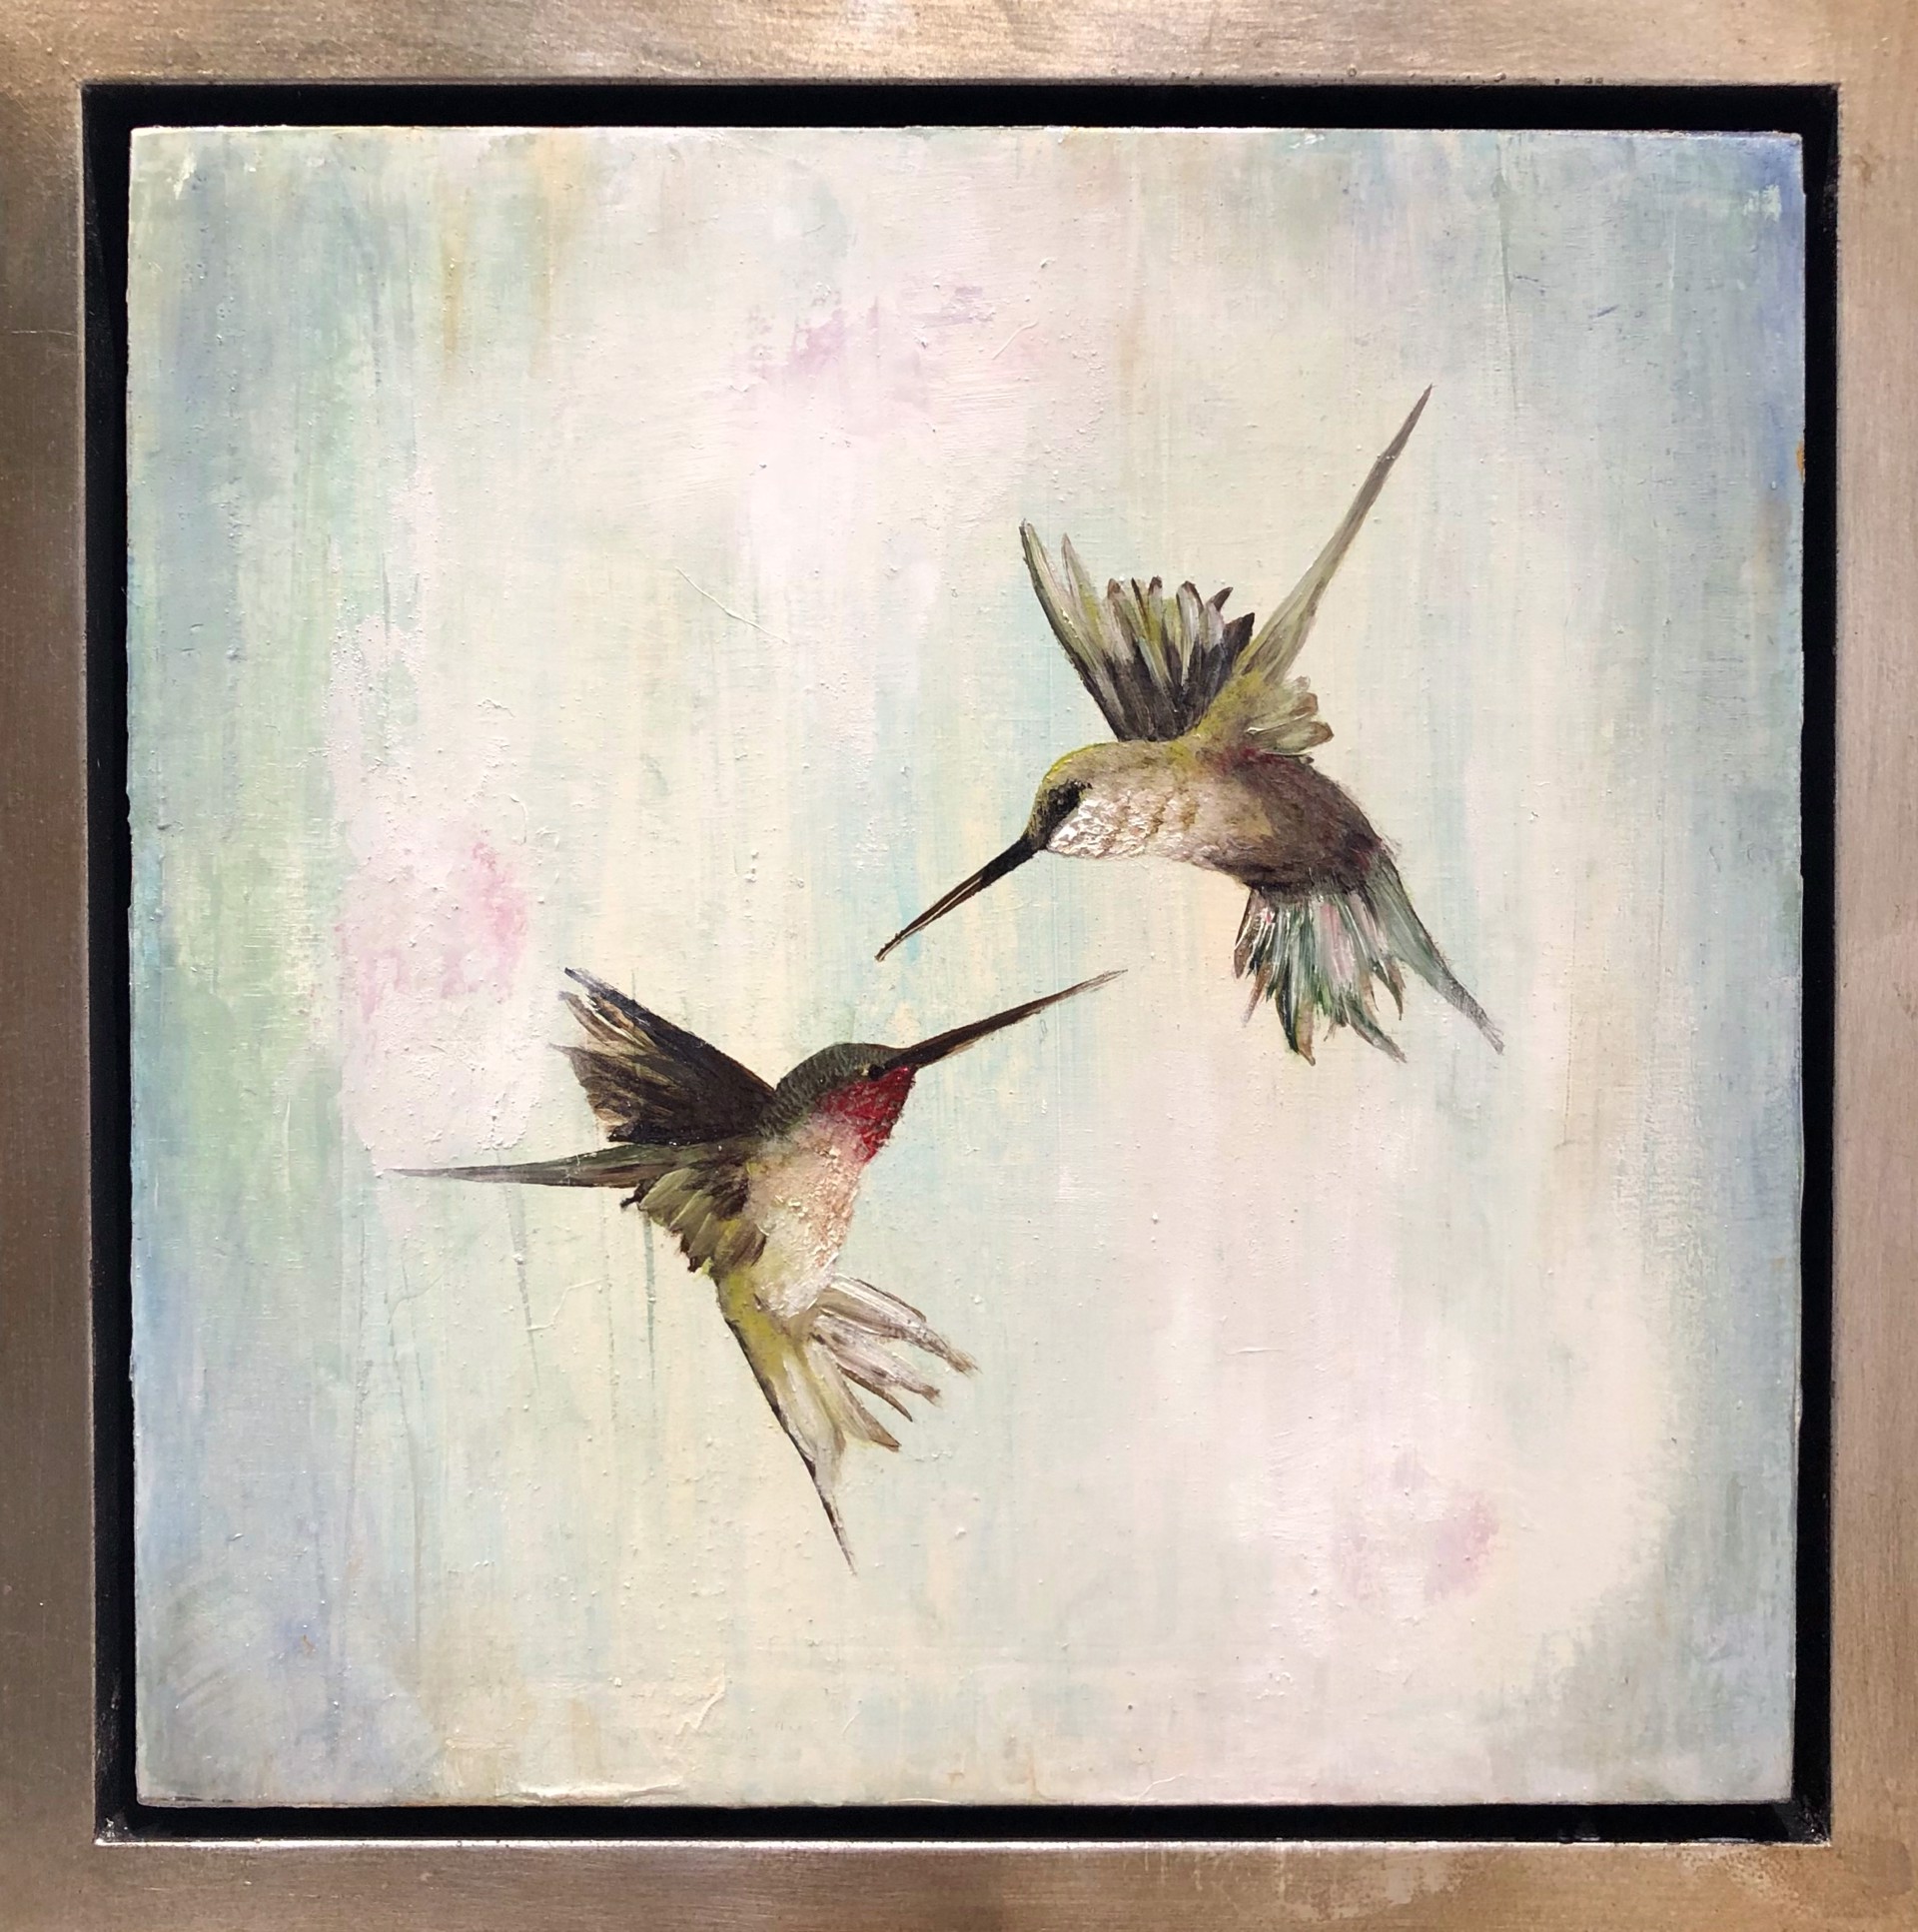 An Original Oil Painting Of Two Humming Birds In Flight With Three Red Dots Suspended On A Light Colored Contemporary Background, By Jenna Von Benedikt